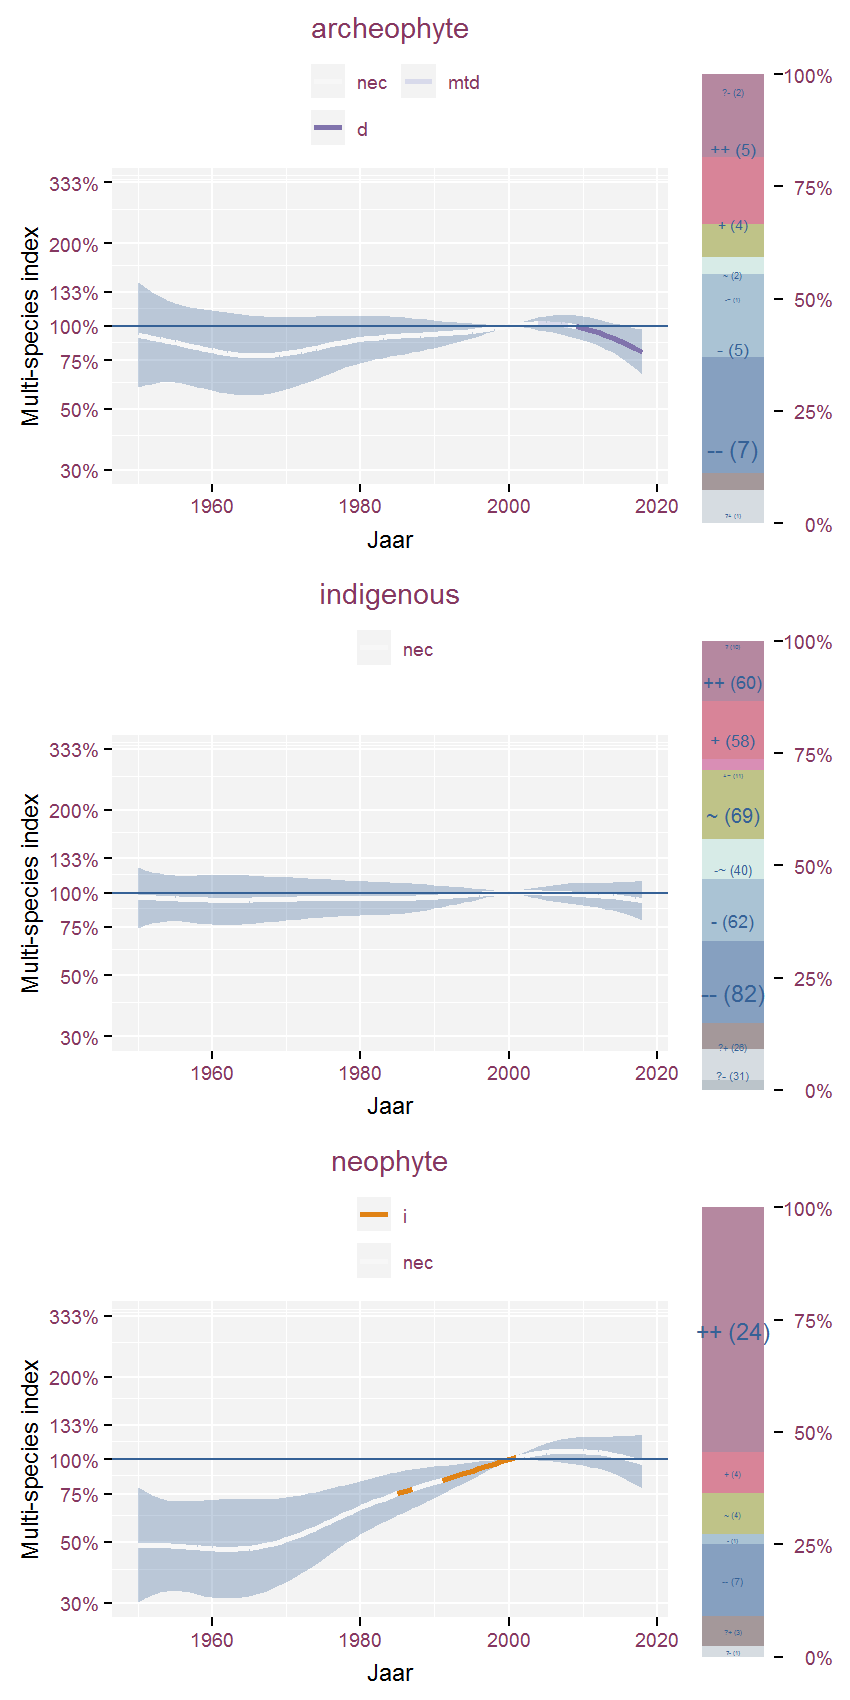 Multi-species index for species groups determined by indigenous, archeophyte or neophyte and period 1950-2018. The index uses 2000 as baseline year.